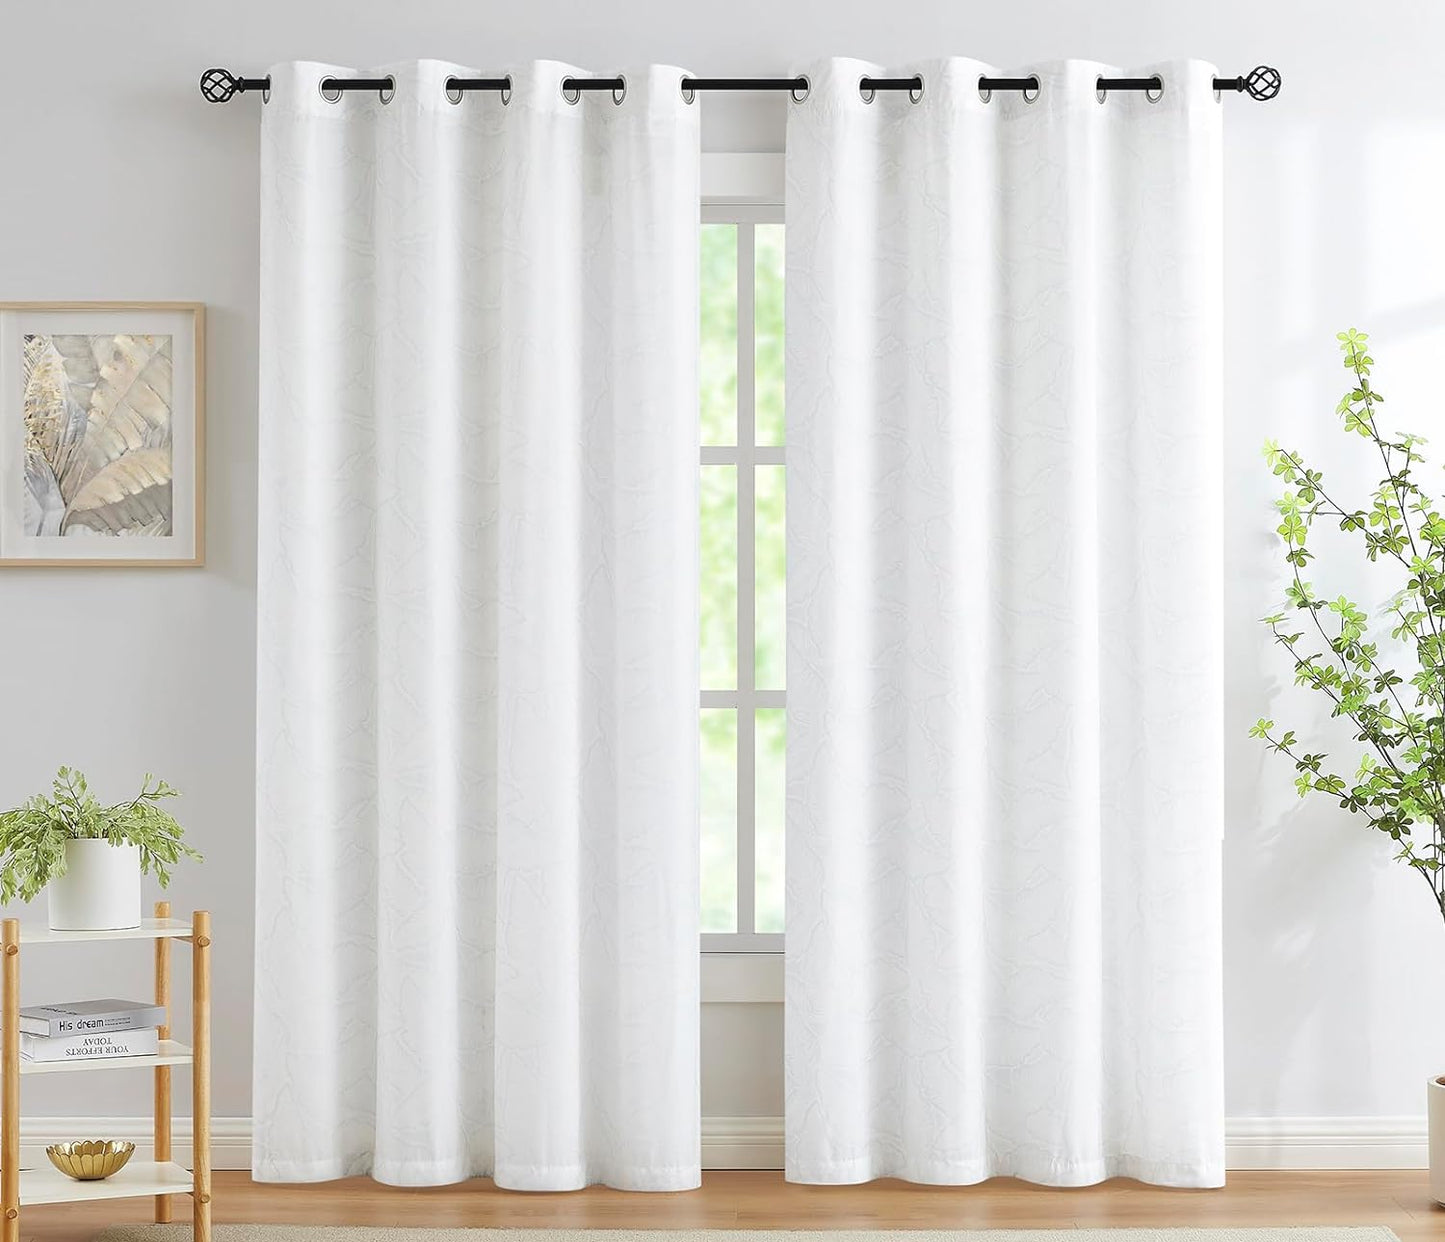 FMFUNCTEX Grey Semi-Sheer Curtains for Living Room Rich Linen Textured Rod Pocket Window Curtain Draperies for Guest Room Not See through 52”W X63”L Set of 2  Fmfunctex Leaf-White 52" X 96" 2Pcs 